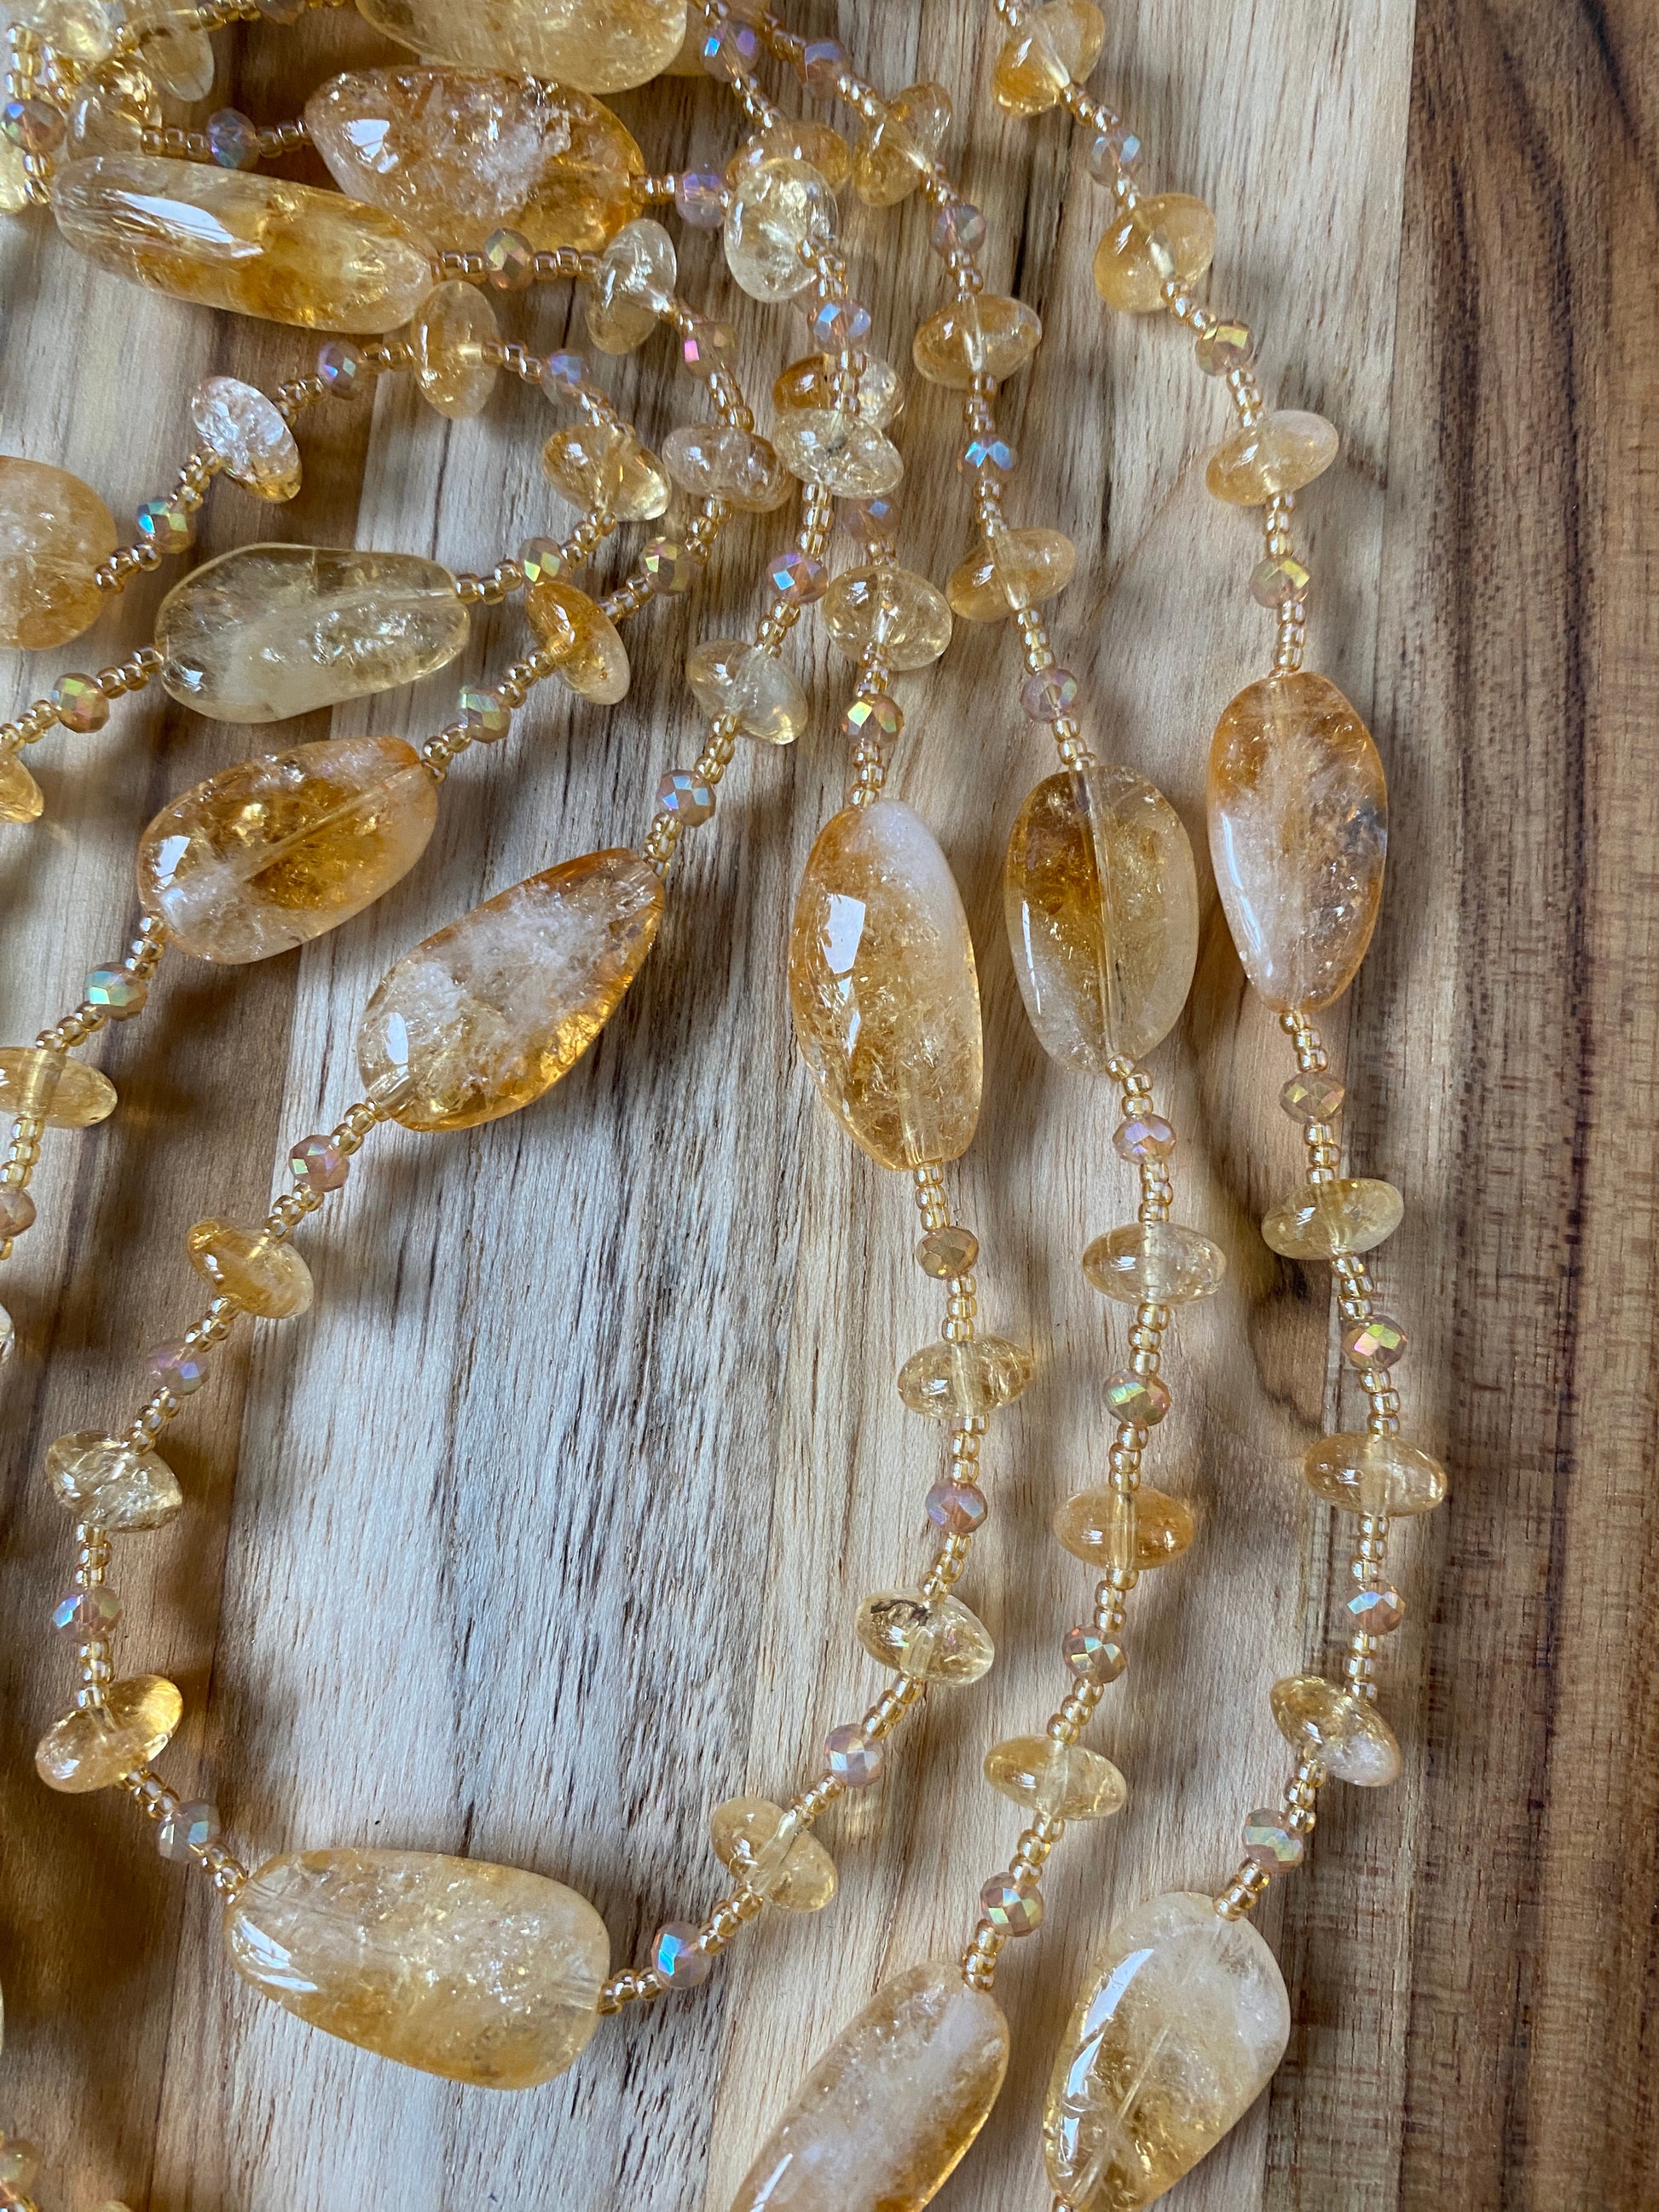 60" Extra Long Beaded Wraparound Necklace with Citrine and Crystal Beads - My Urban Gems